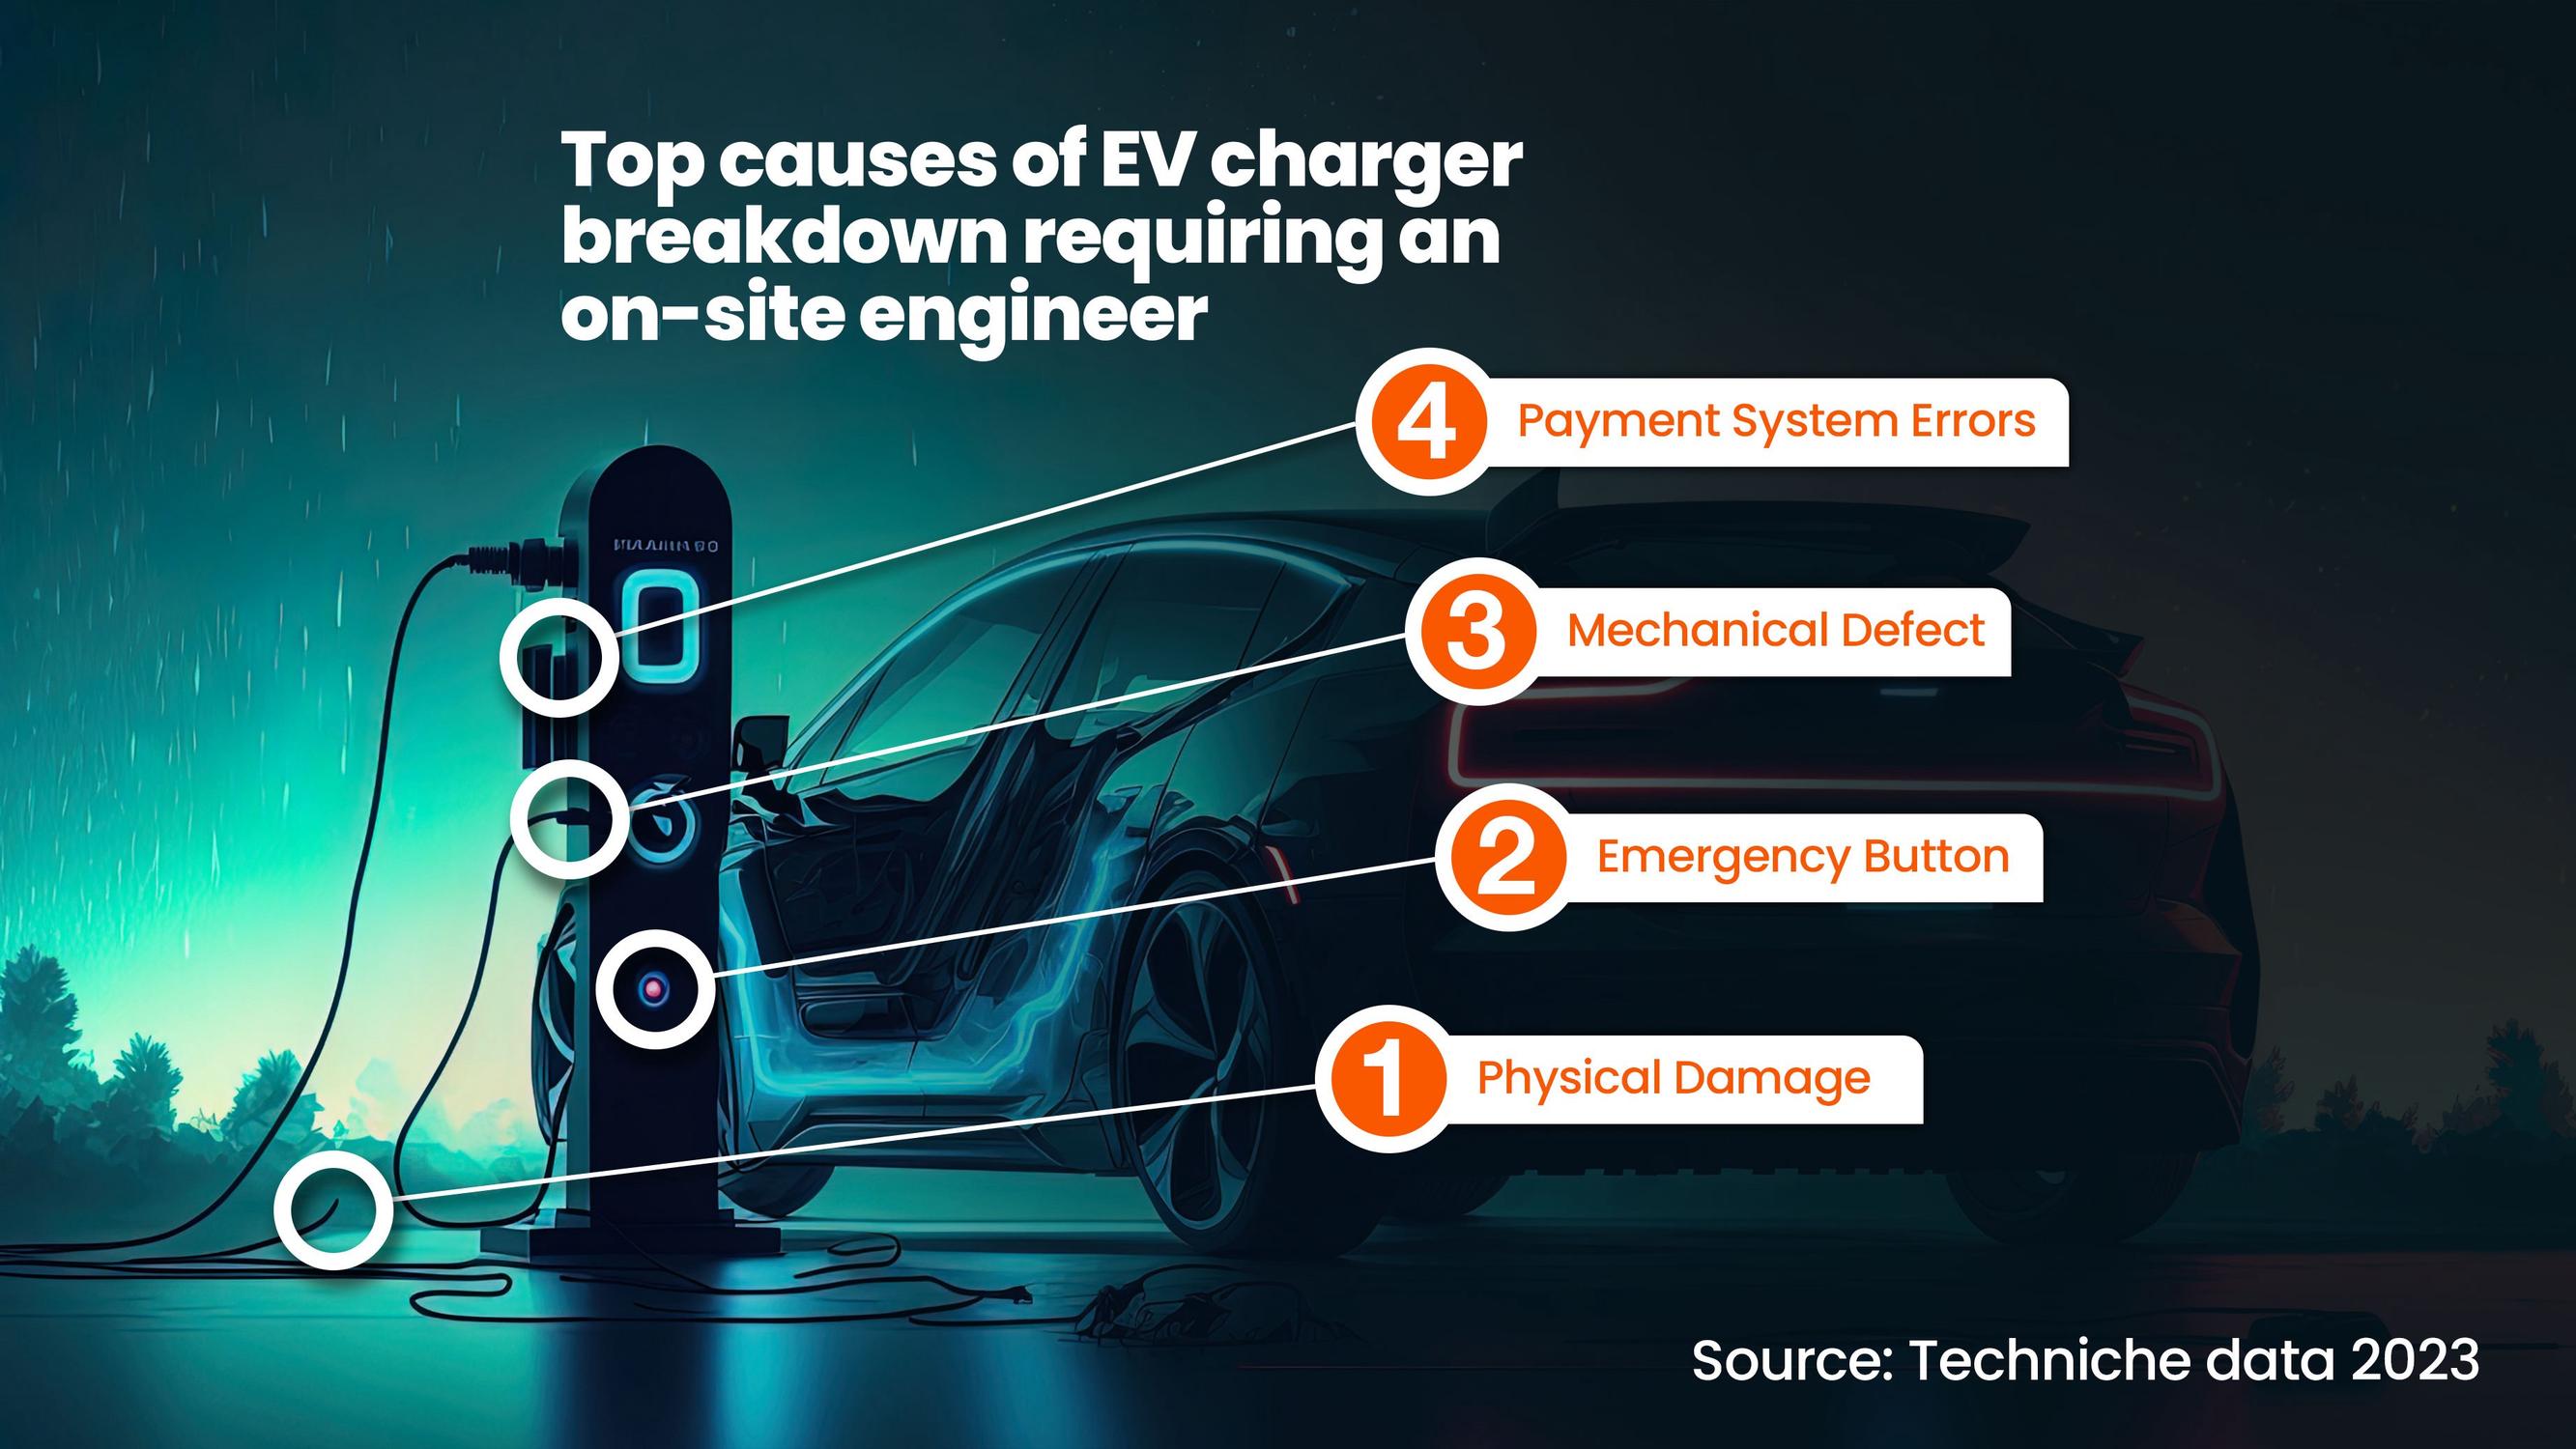 The top 4 reasons for chargepoints being out of service